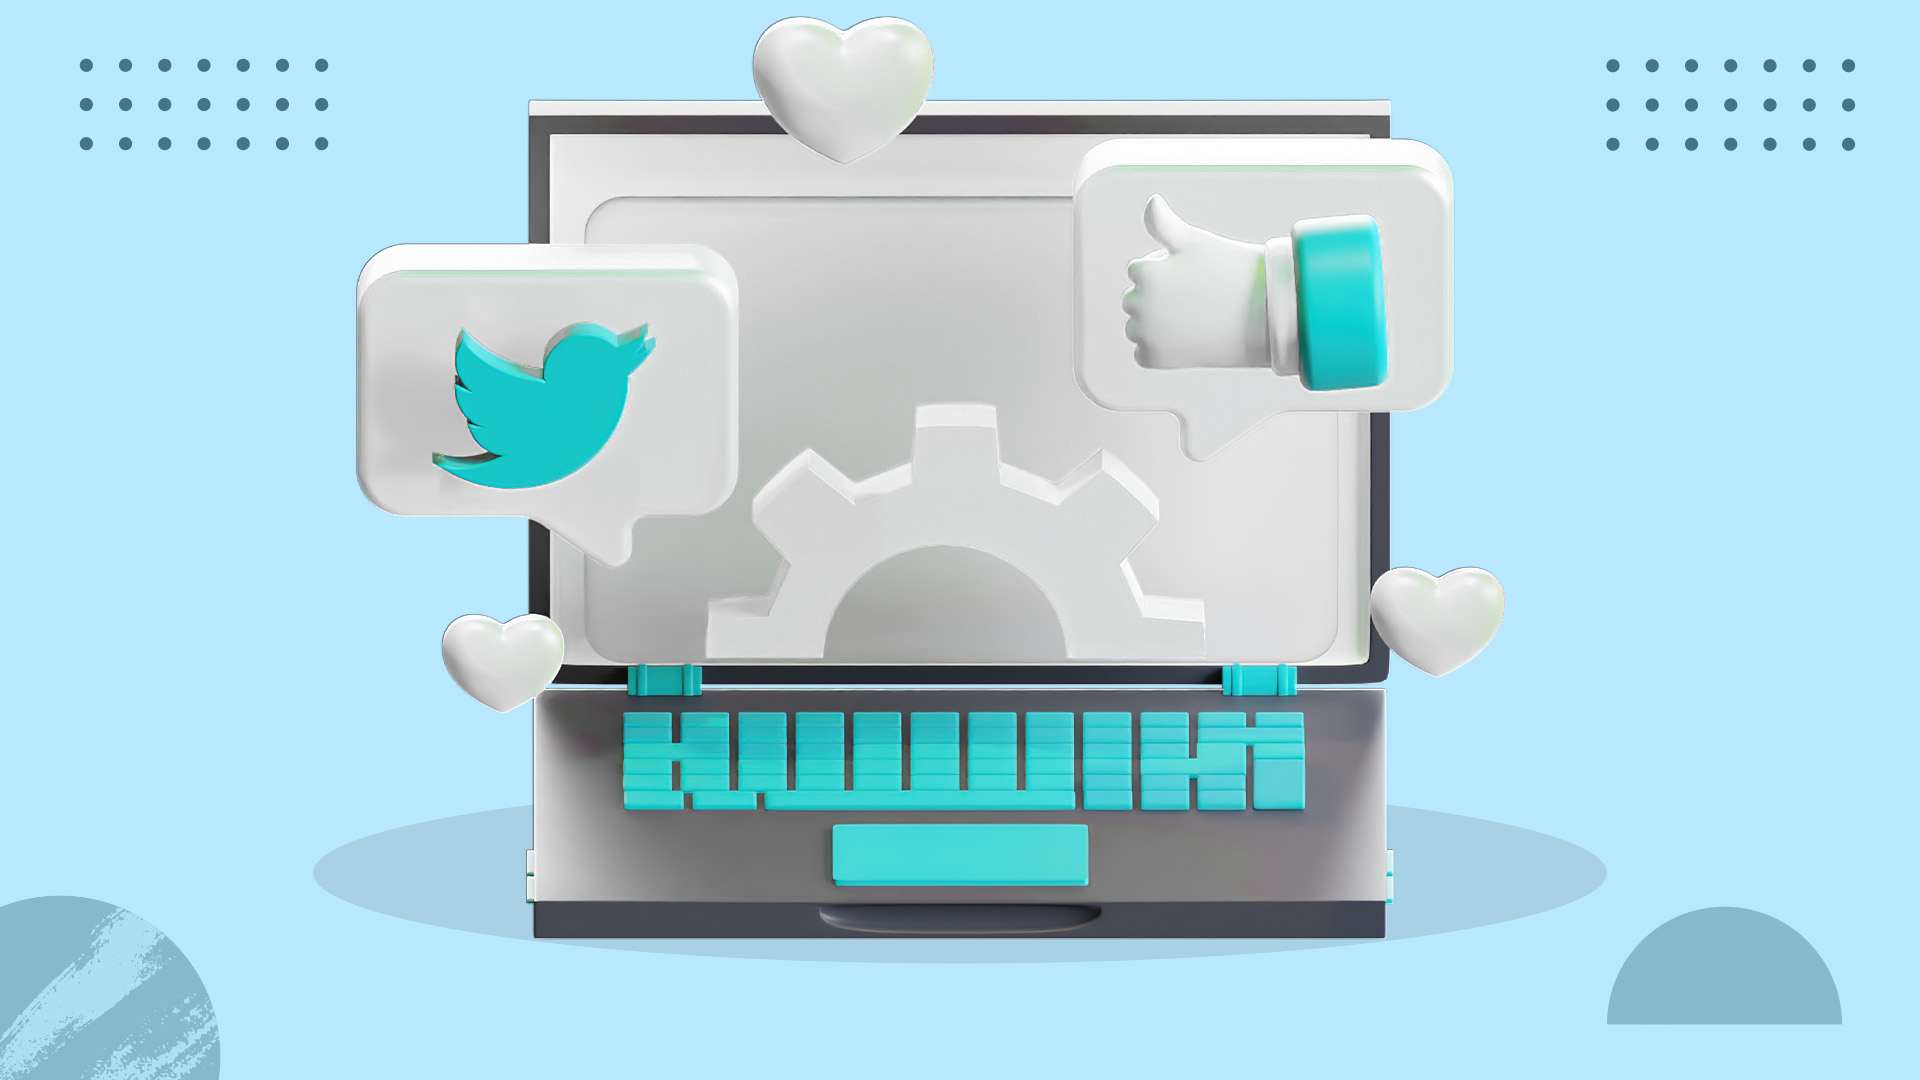 30 Twitter Tools to Boost Your Marketing Efforts